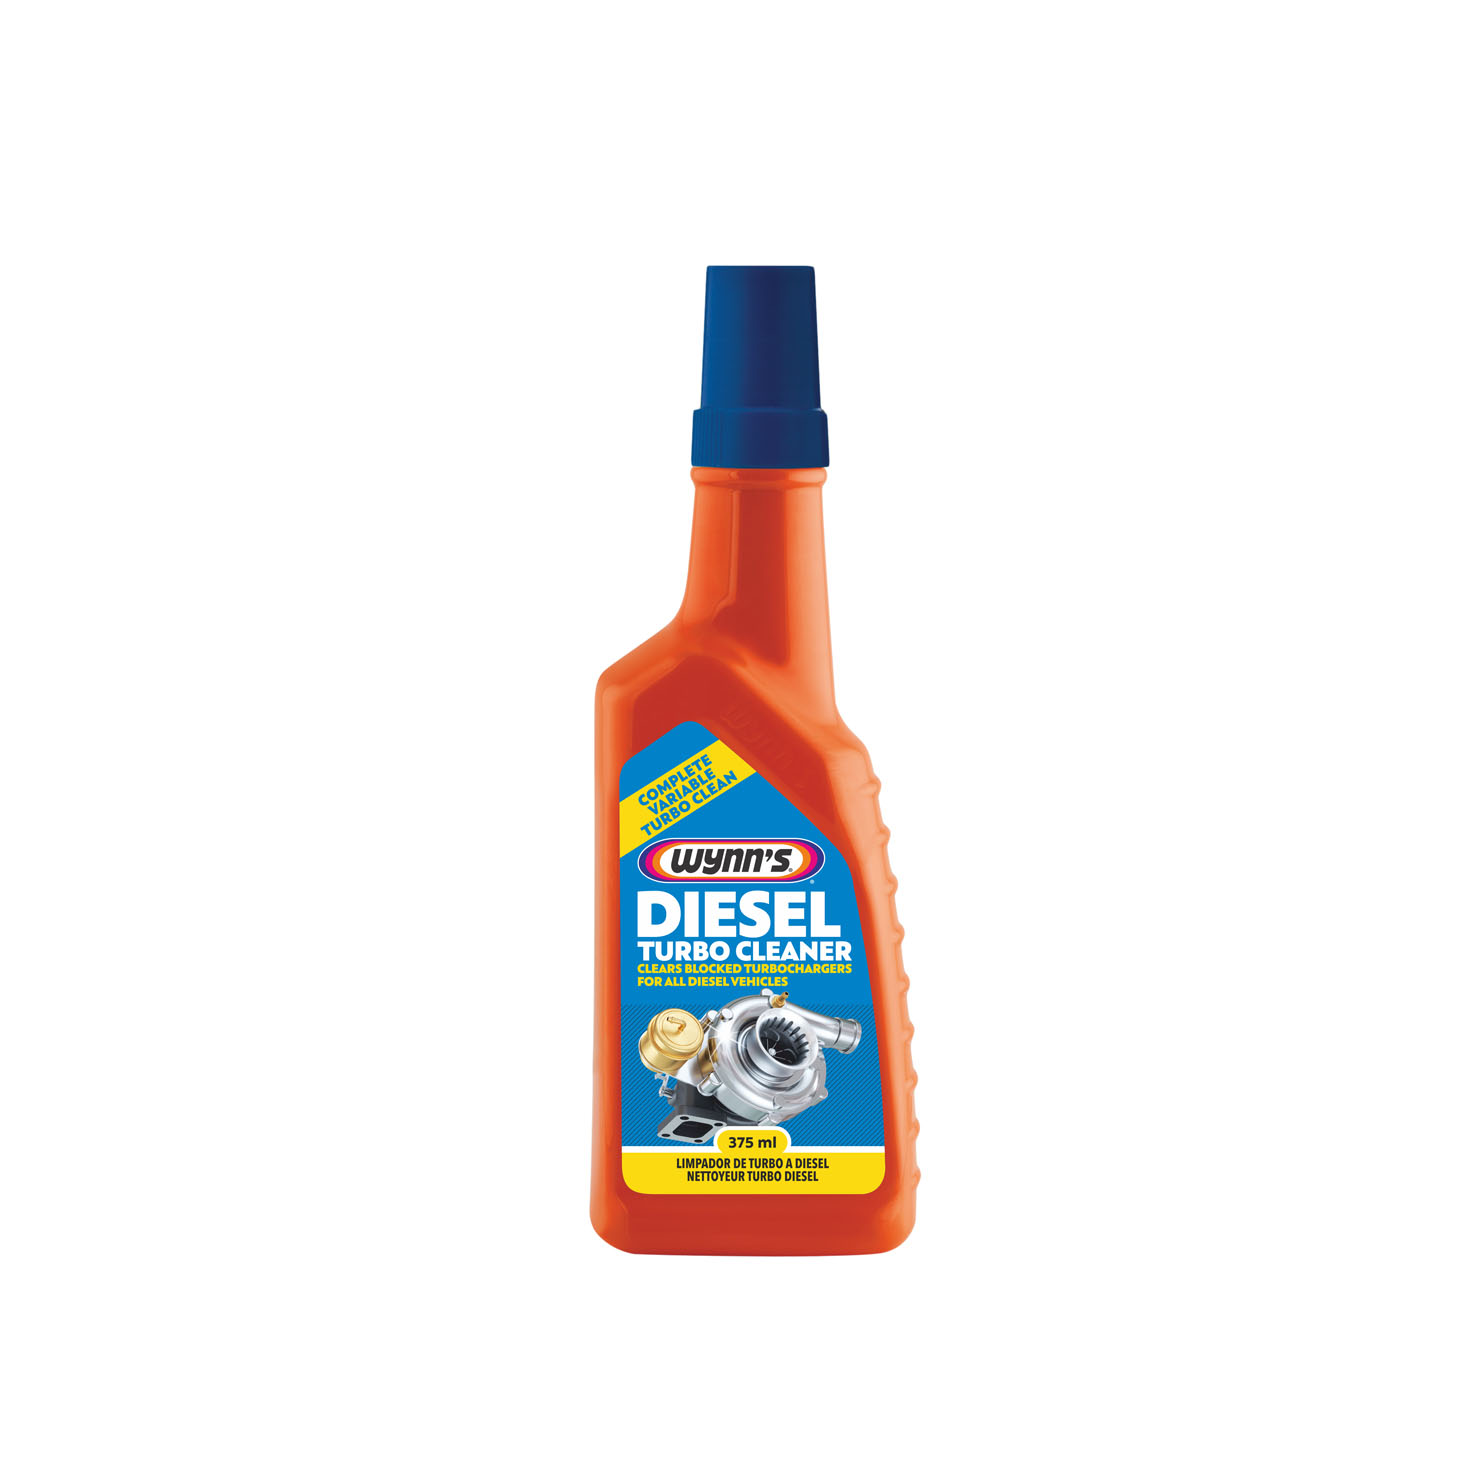 Diesel Turbo Cleaner - Power Maxed - Care Beyond Cleaning